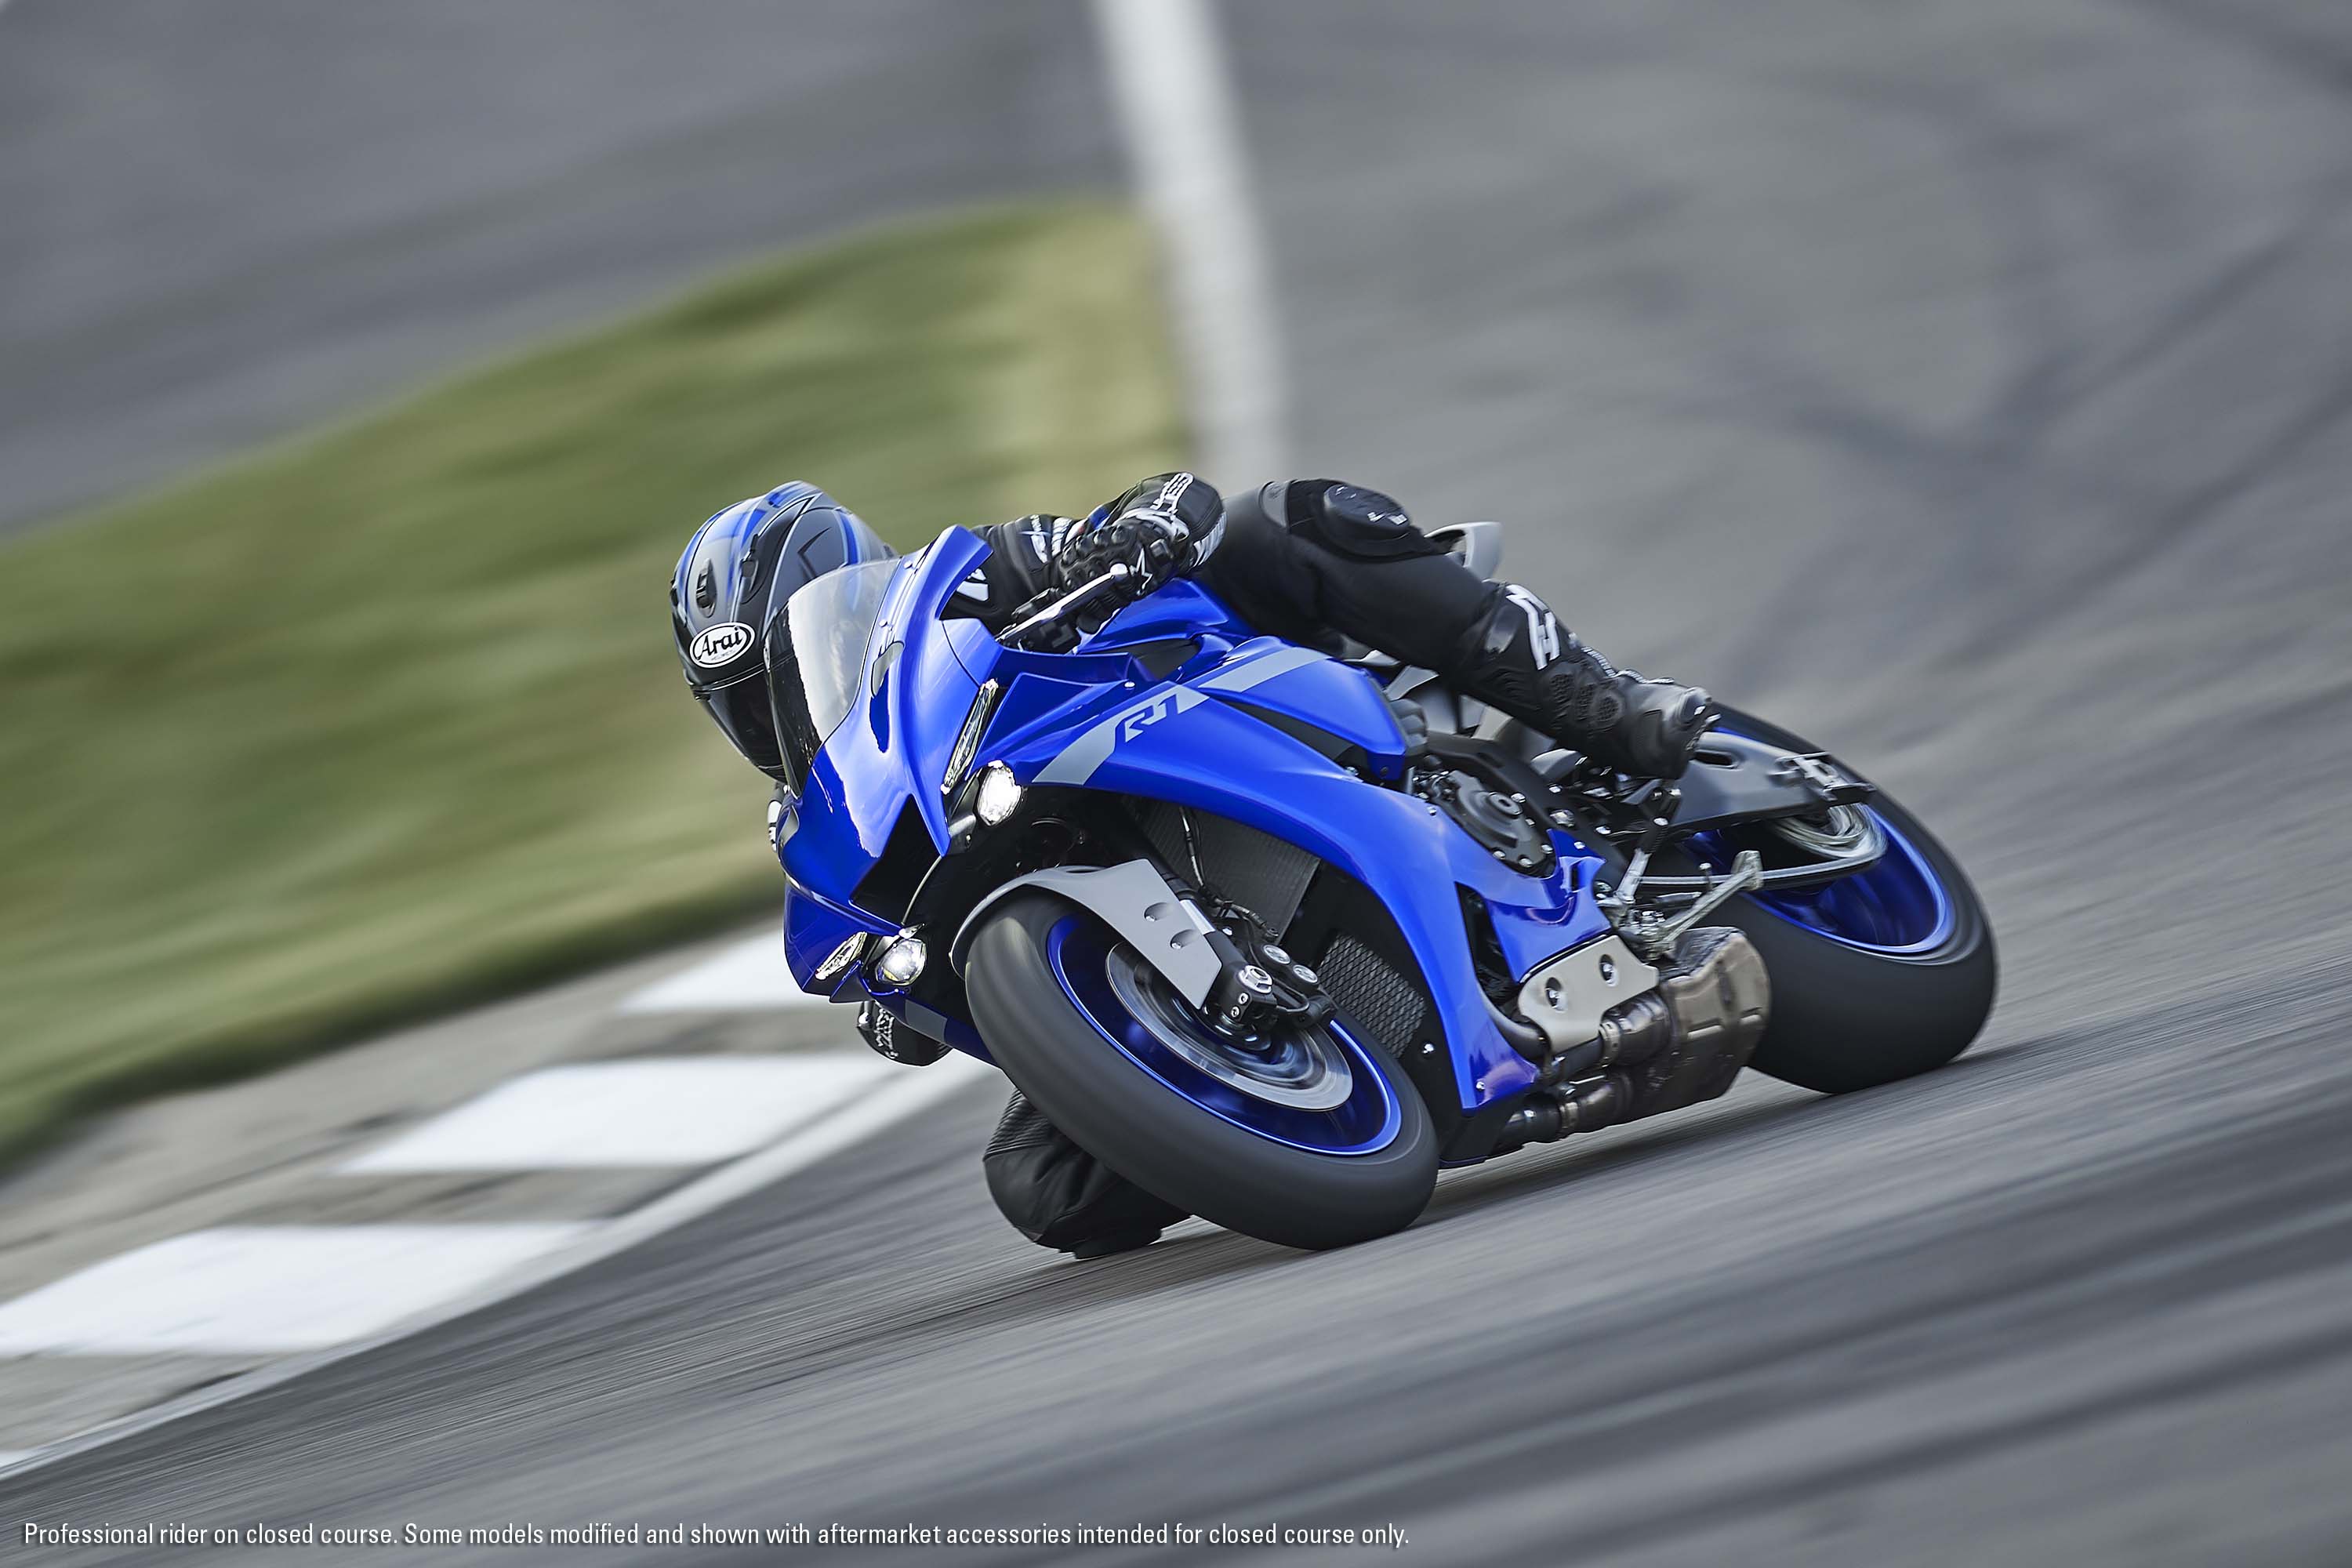 Yamaha Hopes to Sell 2,700 YZF-R1 Motorcycles in Europe Next Year ...